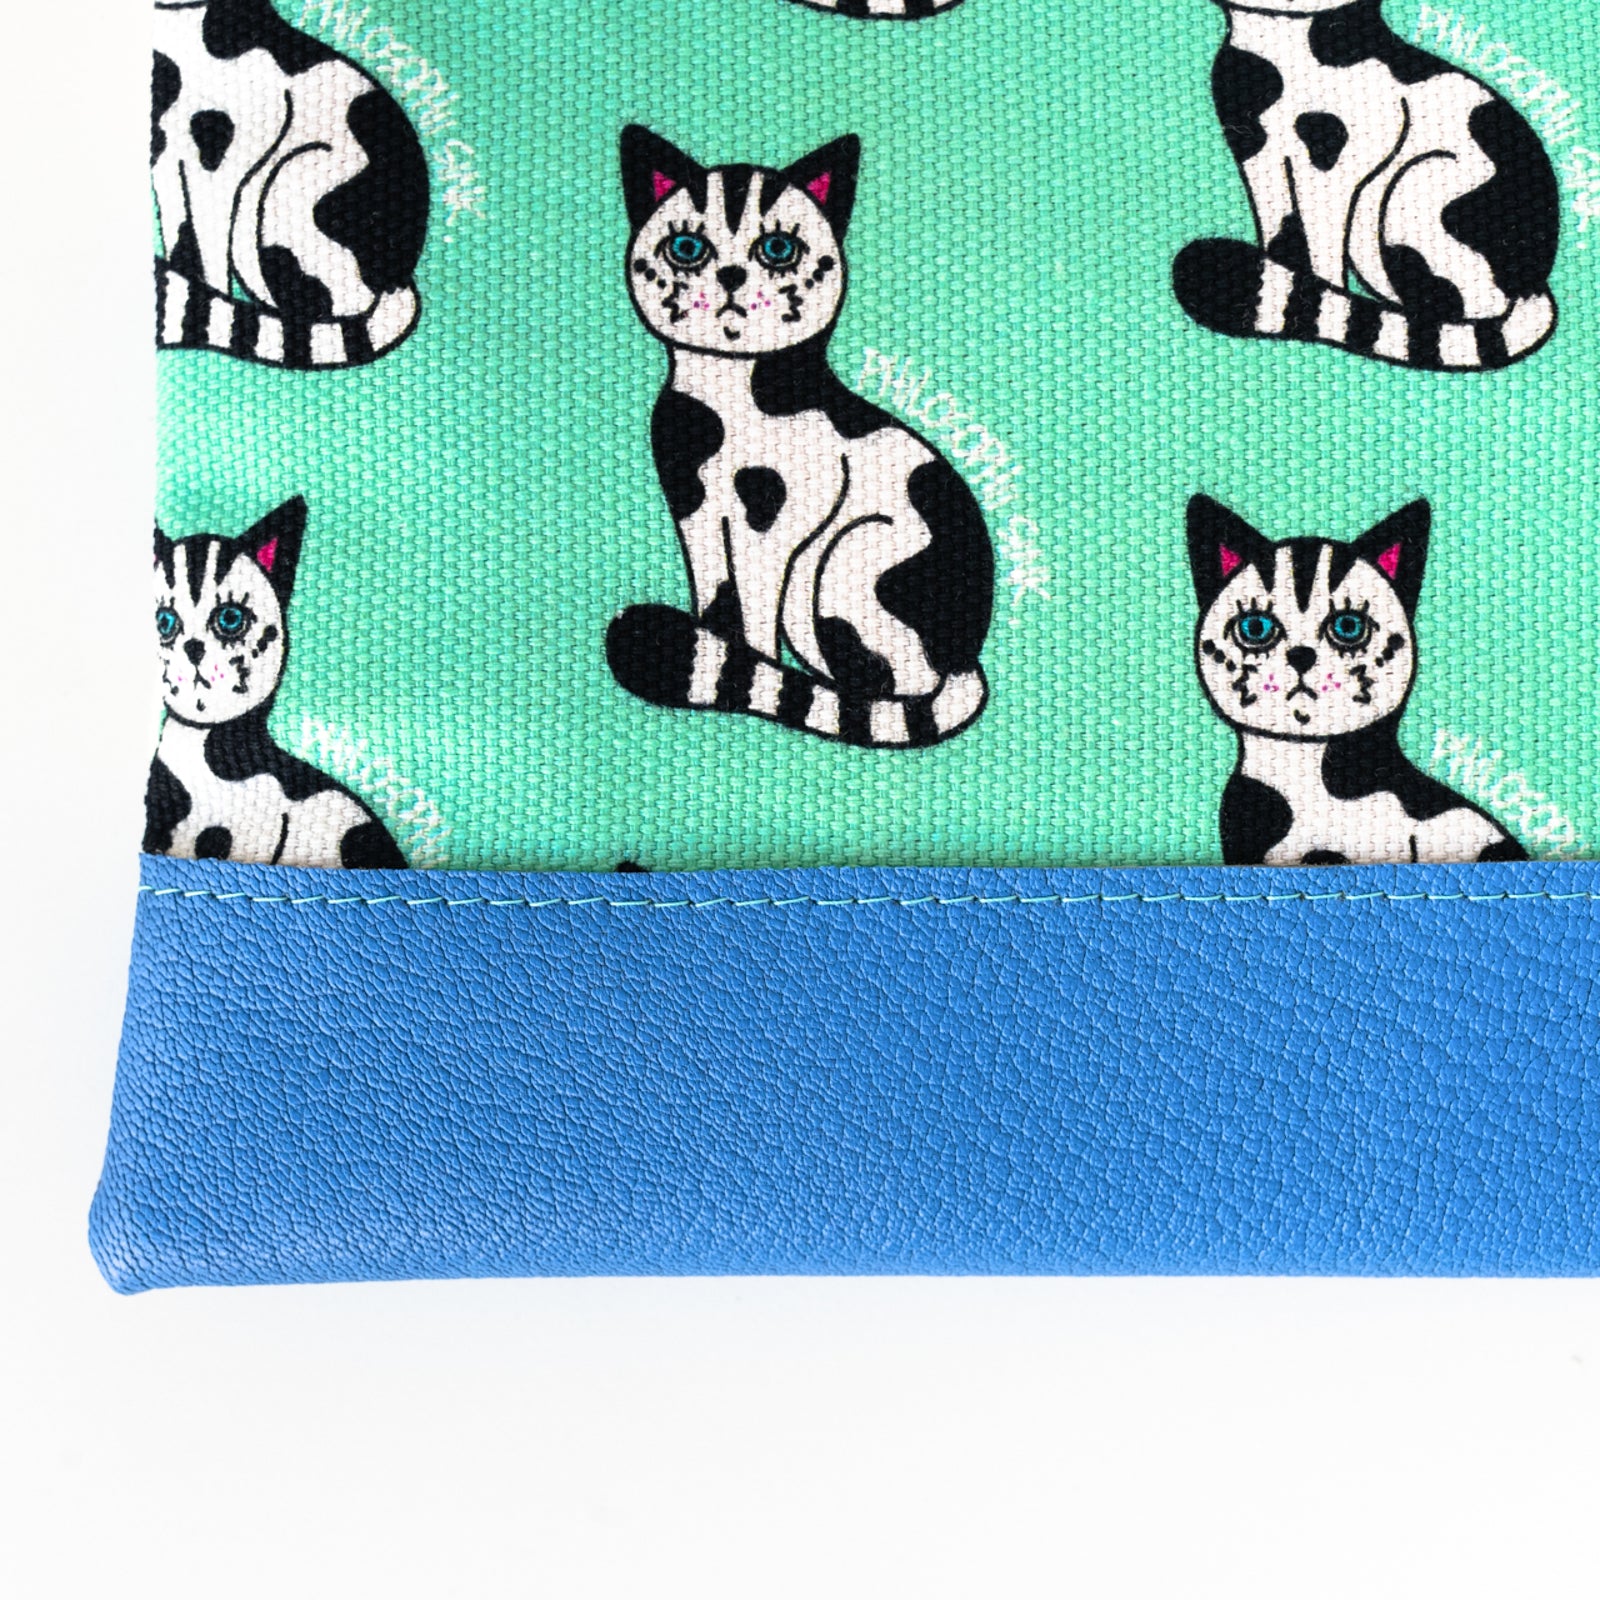 SINK. x Philosophii collaboration cow cat flat pouch